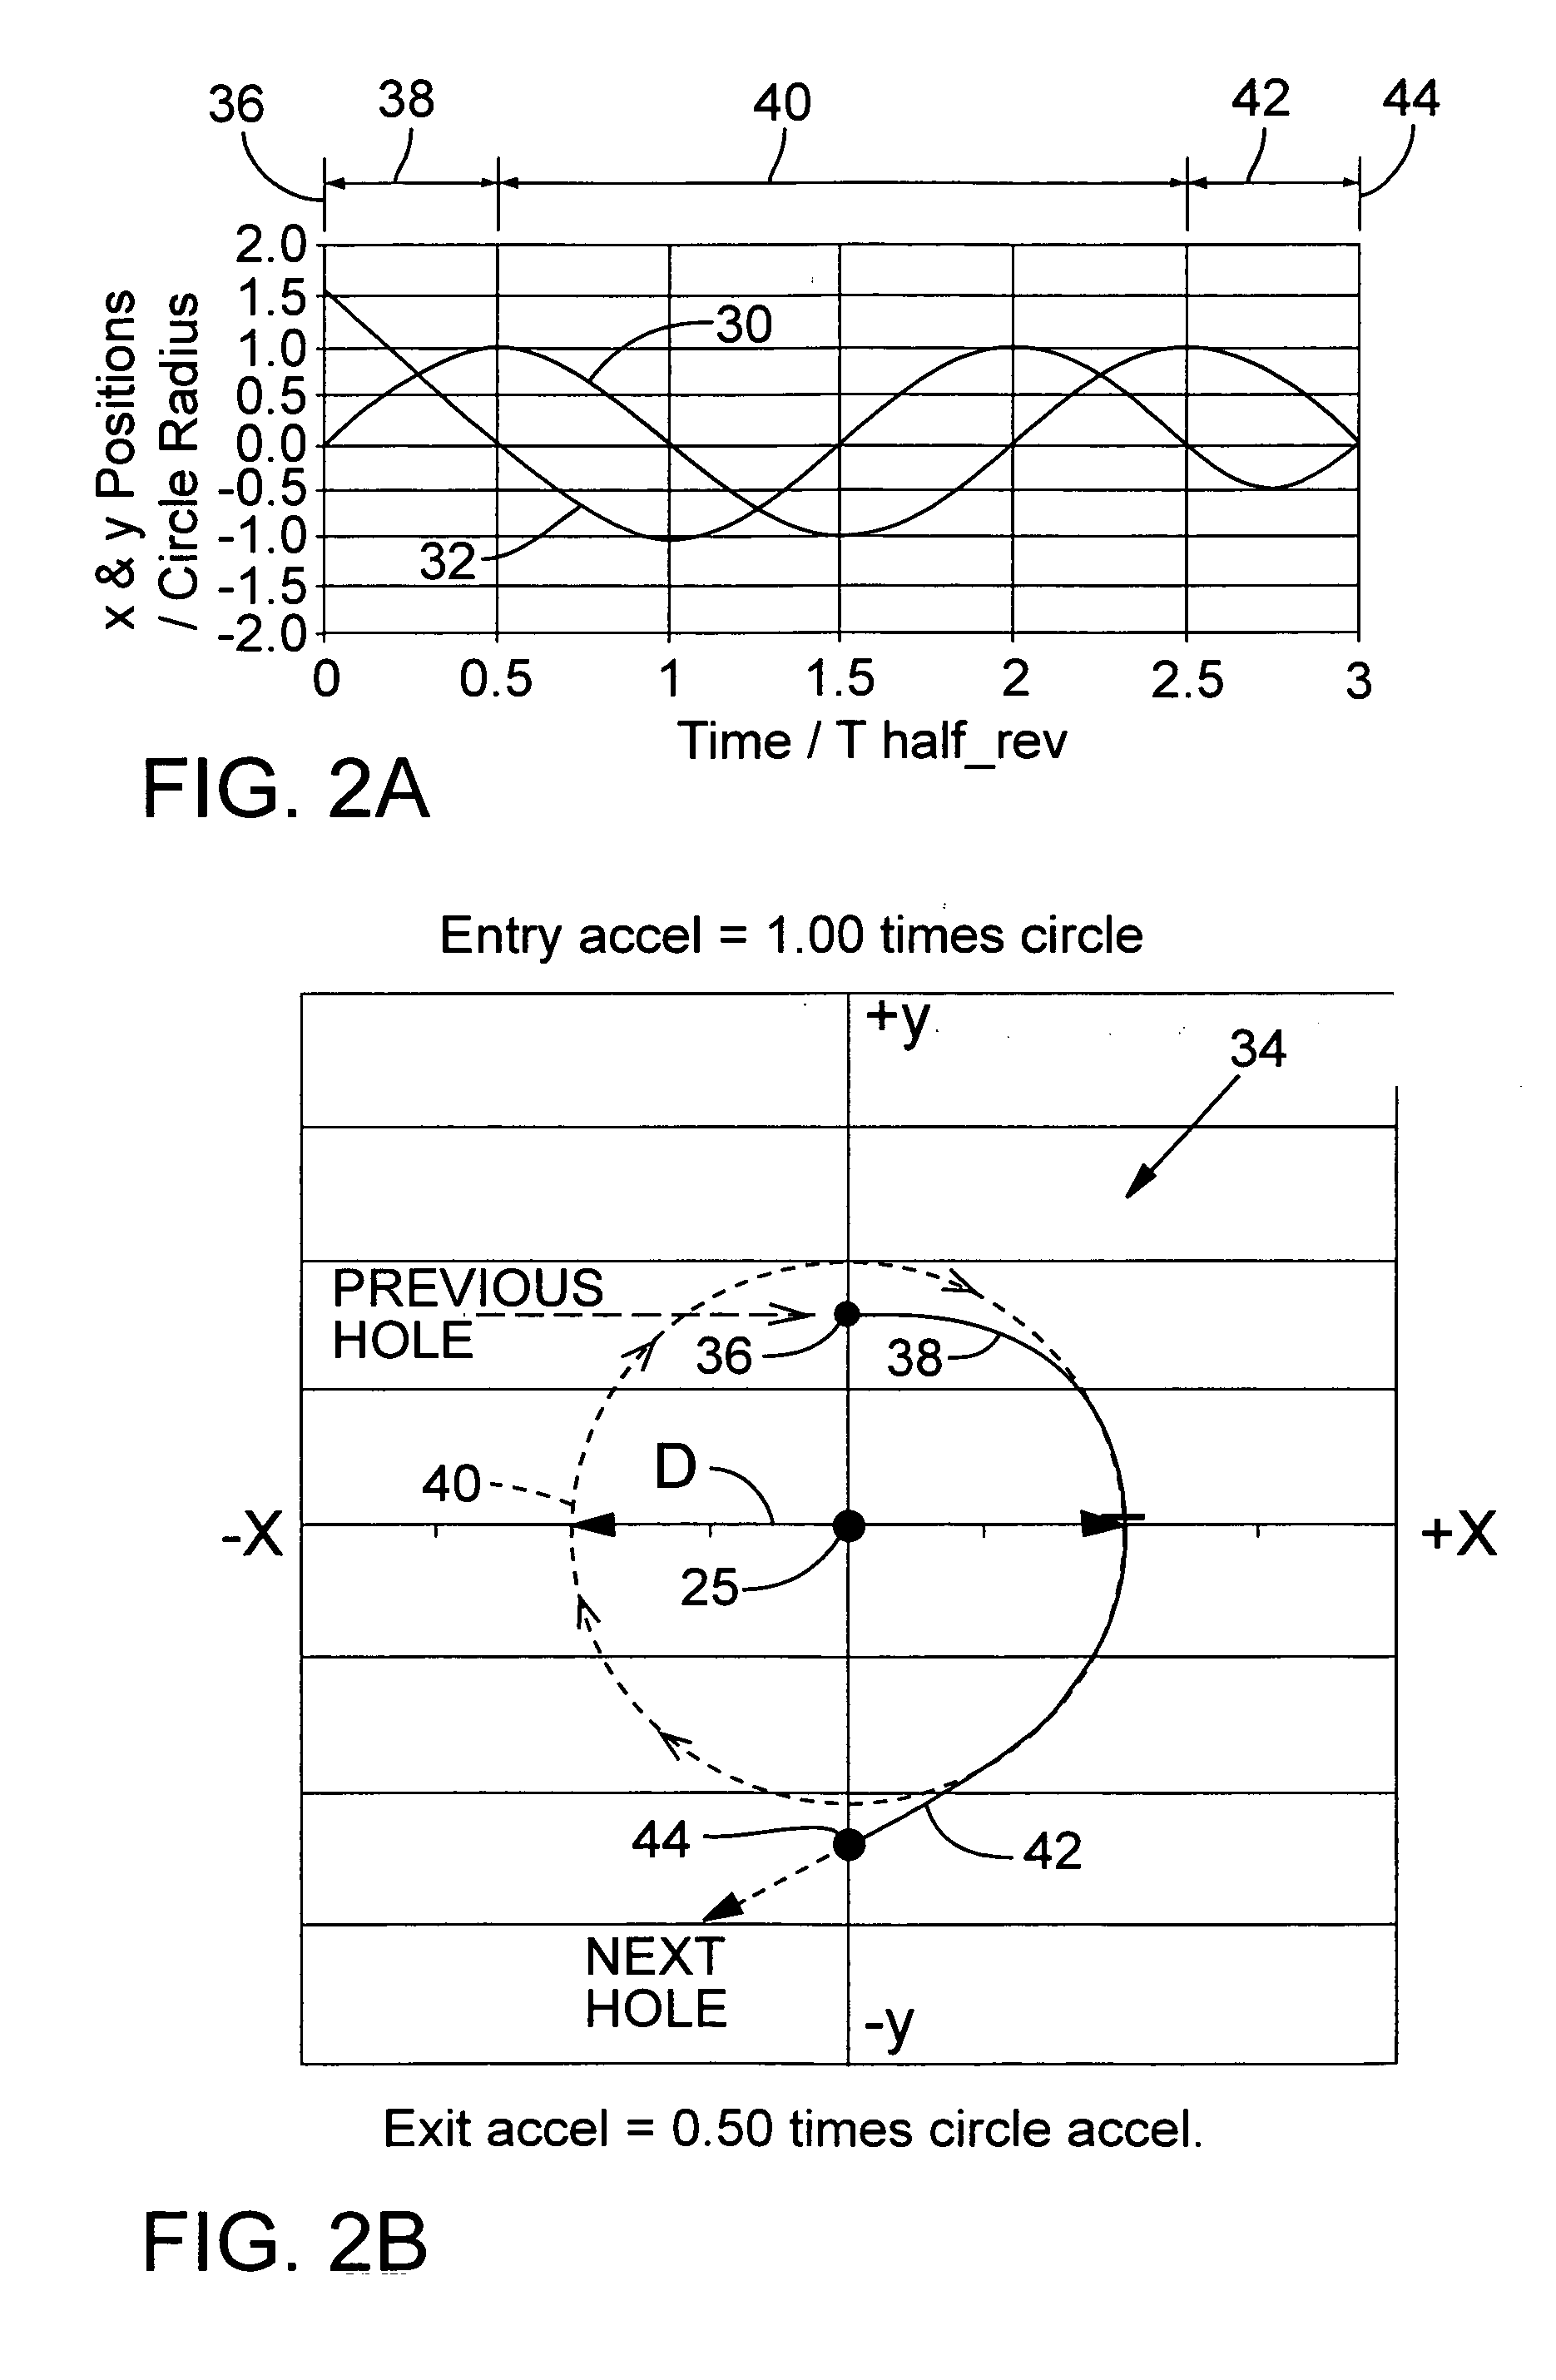 Methods for processing holes by moving precisely timed laser pulses in circular and spiral trajectories